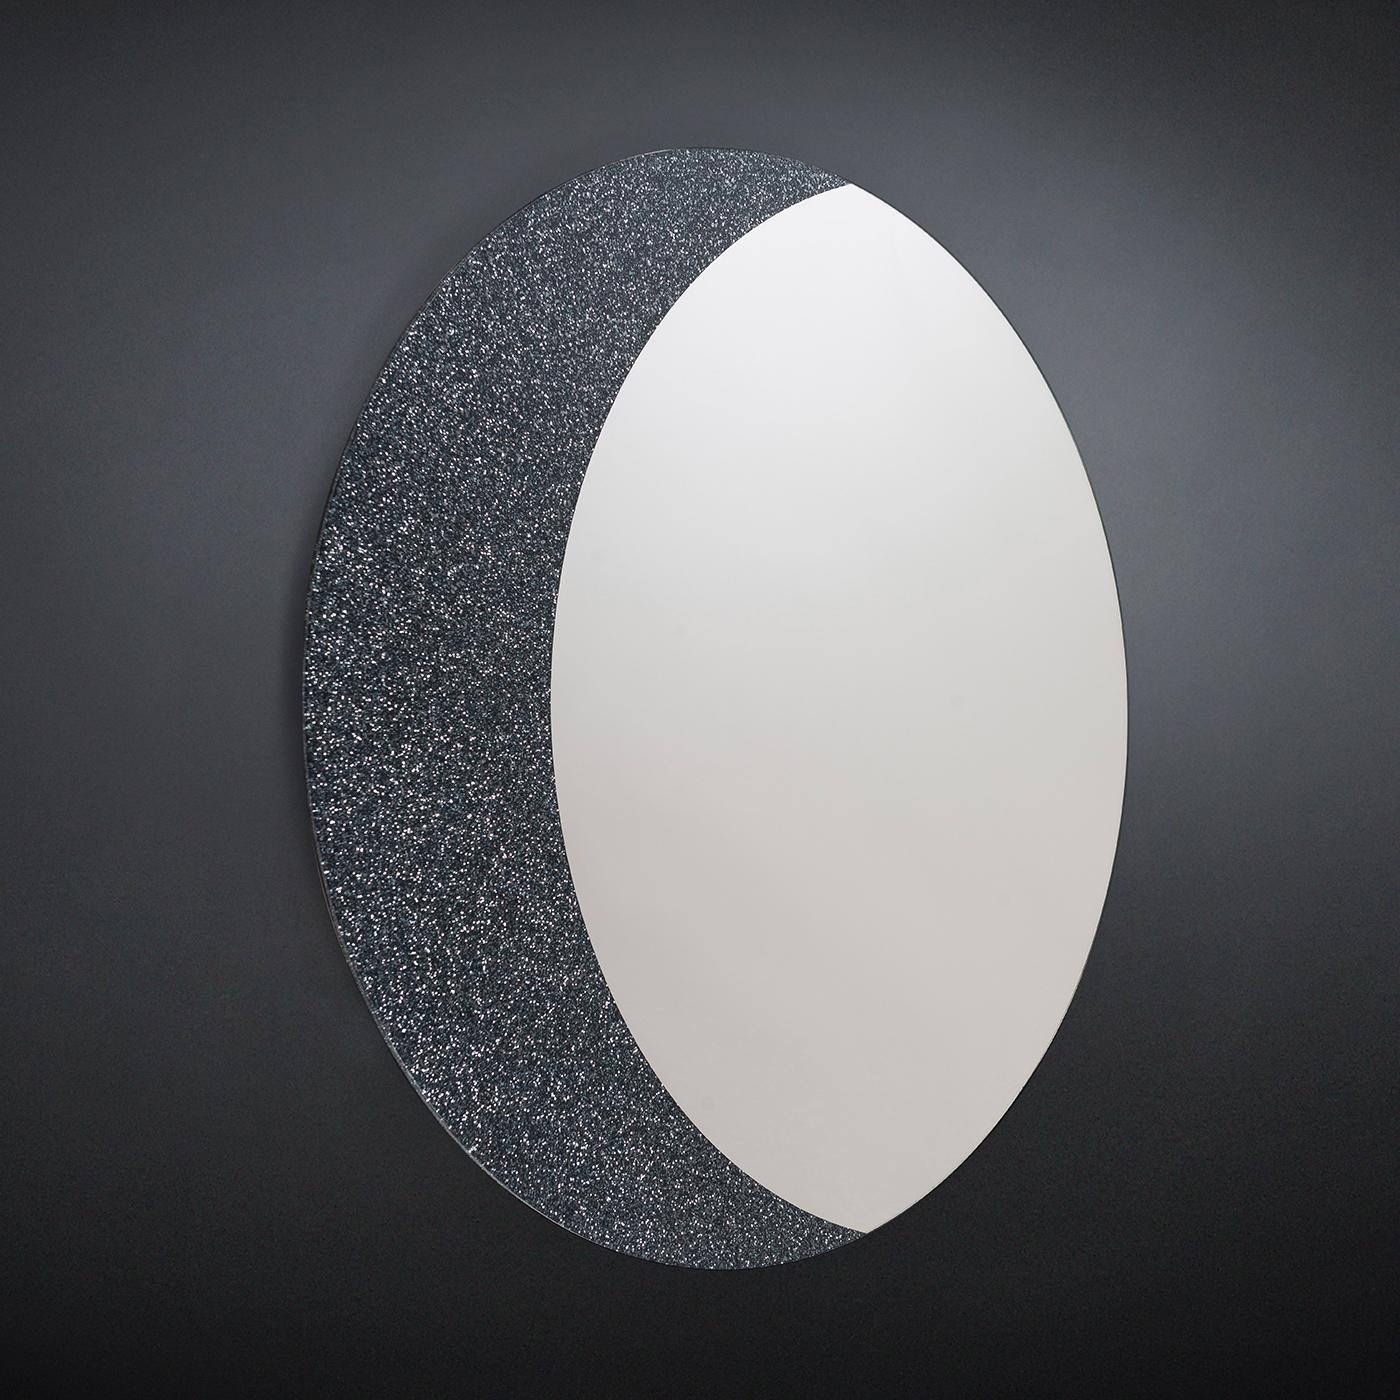 Designed by Giorgio Ragazzini, this mirror celebrates our satellite as seen when it raises. The round shape of the piece has a curved frame on one side contrasting in color and texture with the mirrored glass to create a poetic image of strong